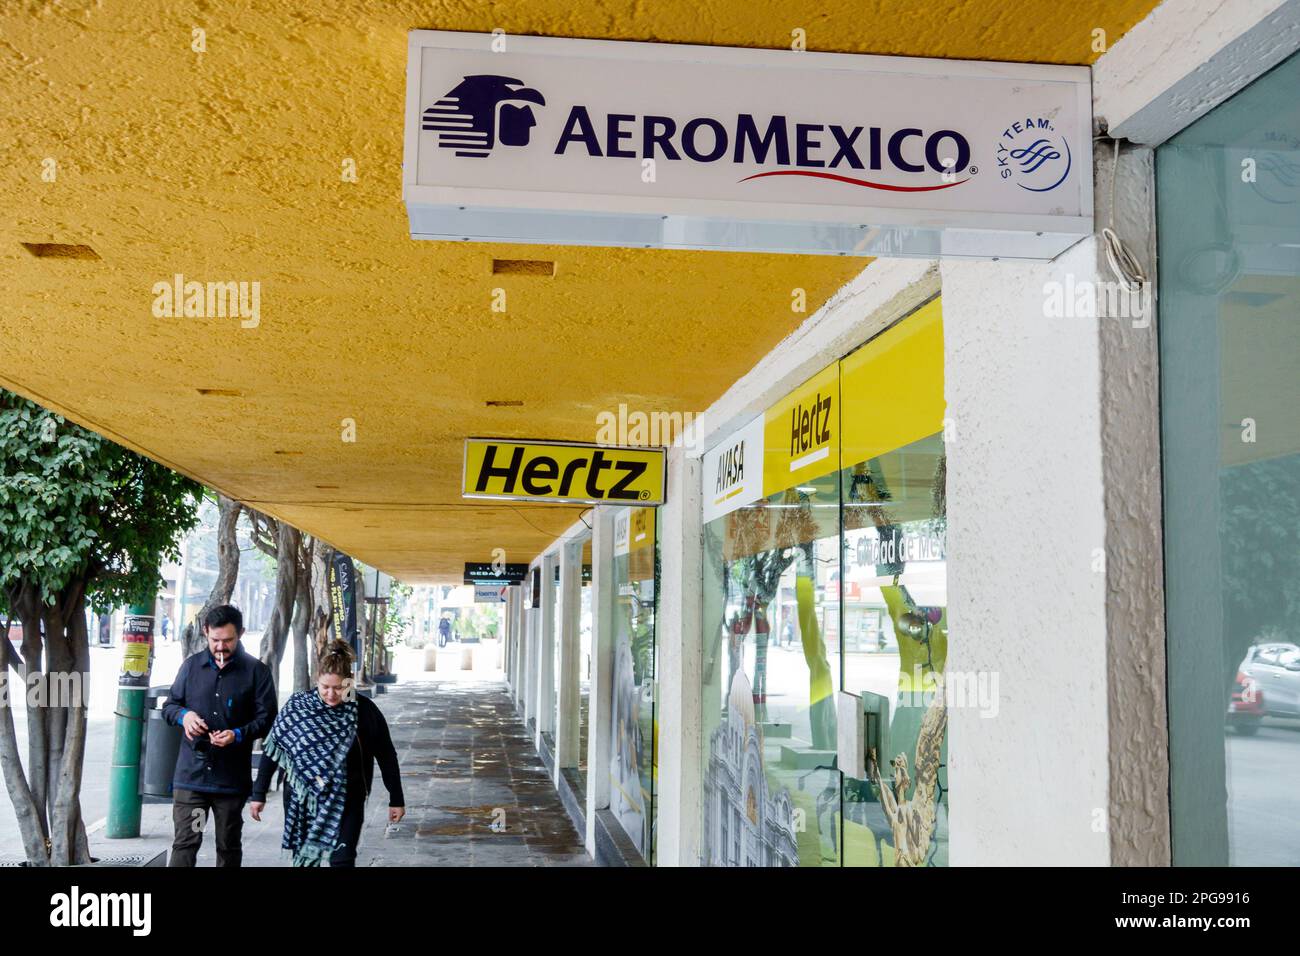 Mexico City,Aeromexico airlines Hertz rental rent a car,man men male,woman women lady female,adult adults,resident residents,couple couples,outside ex Stock Photo